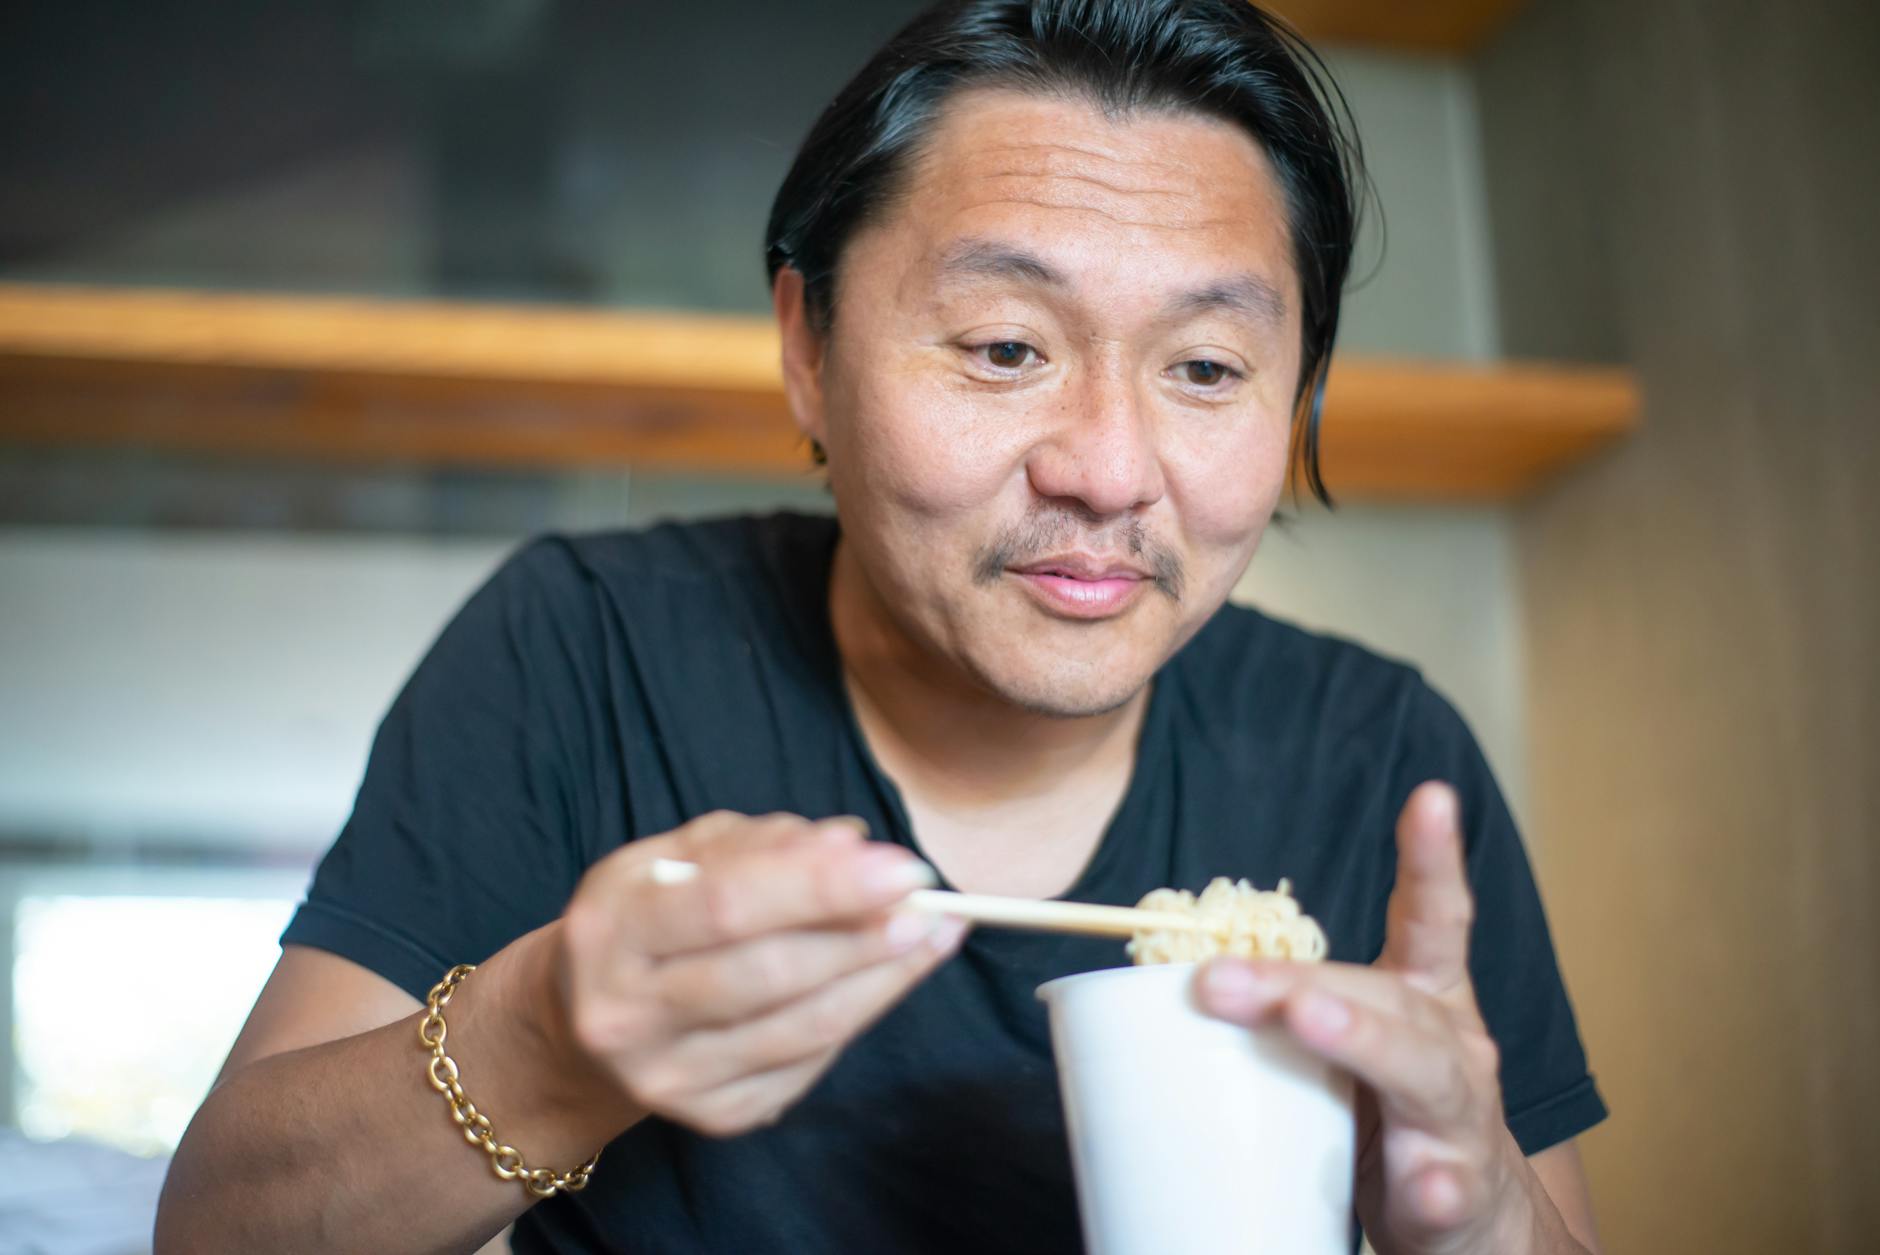 Man Eating a Cup of Noodles